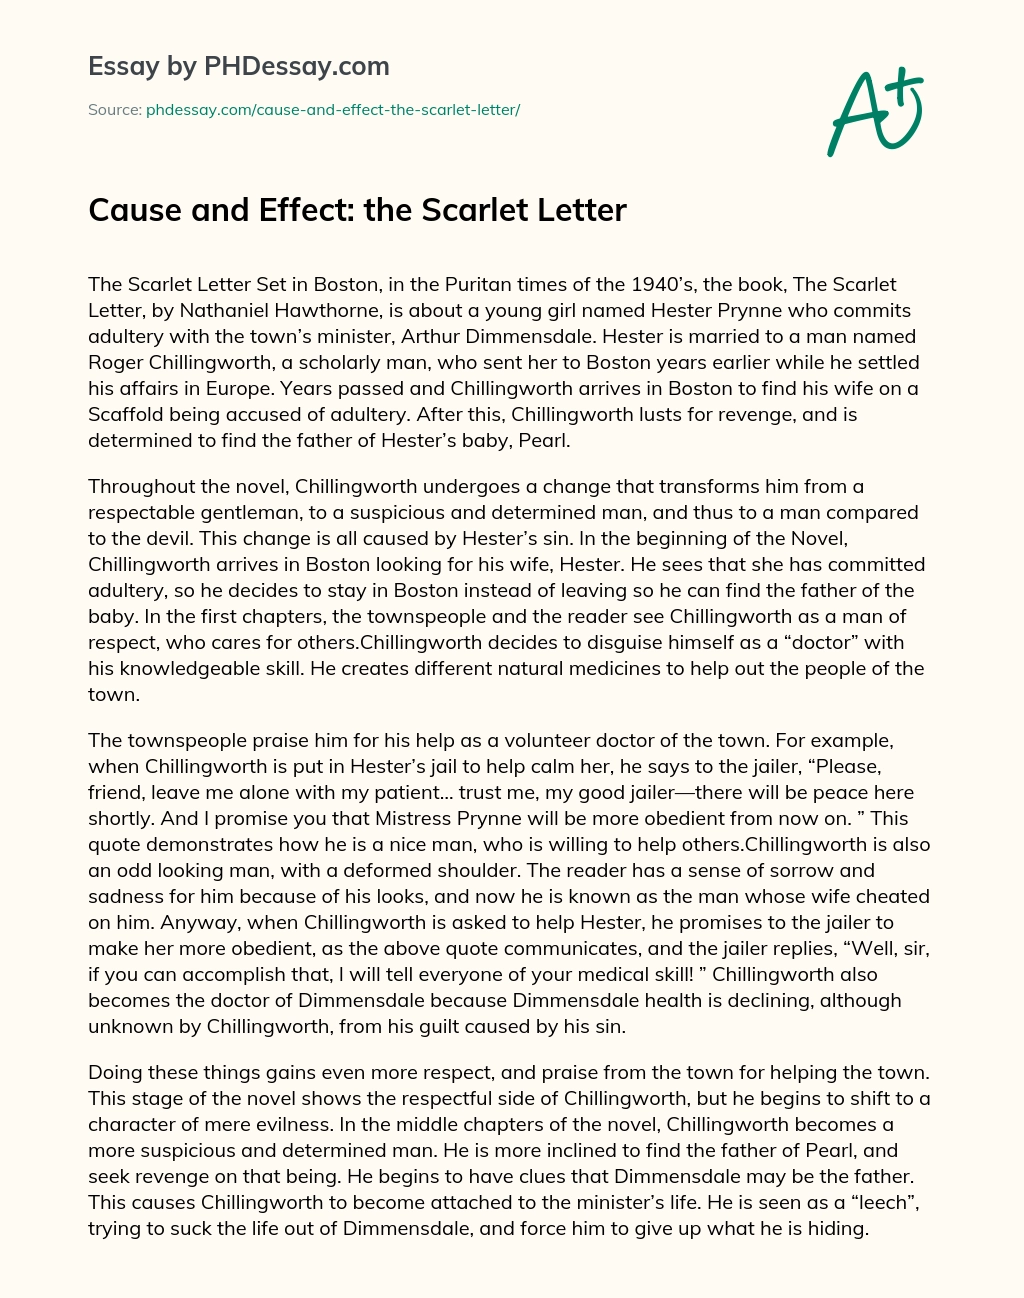 Cause and Effect: the Scarlet Letter